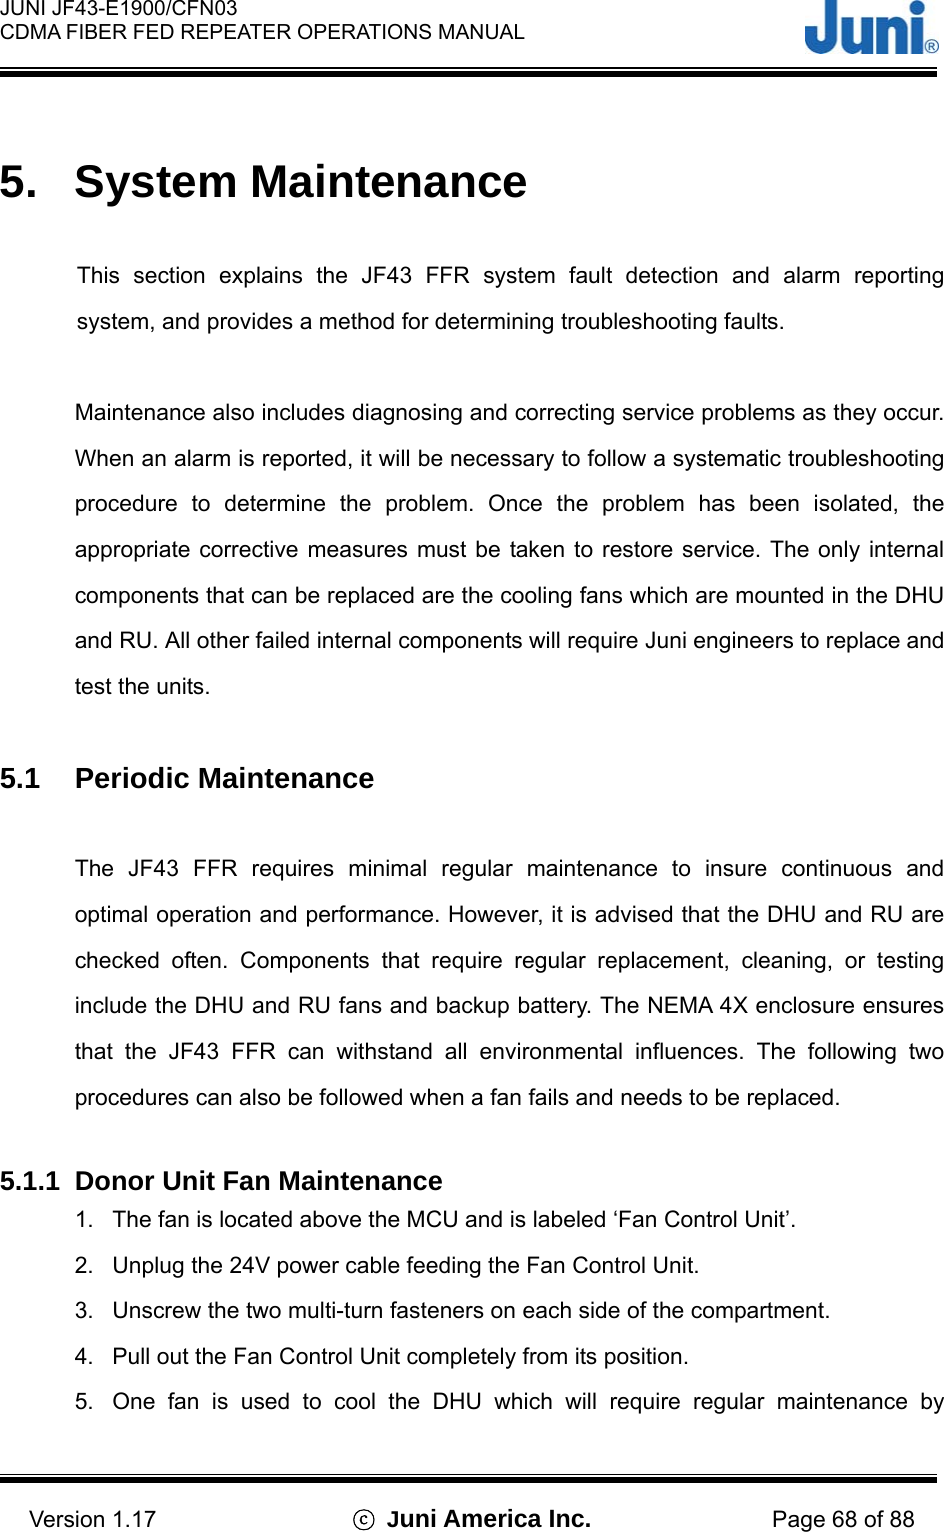  JUNI JF43-E1900/CFN03 CDMA FIBER FED REPEATER OPERATIONS MANUAL                                    Version 1.17  ⓒ Juni America Inc. Page 68 of 88  5. System Maintenance  This section explains the JF43 FFR system fault detection and alarm reporting system, and provides a method for determining troubleshooting faults.    Maintenance also includes diagnosing and correcting service problems as they occur. When an alarm is reported, it will be necessary to follow a systematic troubleshooting procedure to determine the problem. Once the problem has been isolated, the appropriate corrective measures must be taken to restore service. The only internal components that can be replaced are the cooling fans which are mounted in the DHU and RU. All other failed internal components will require Juni engineers to replace and test the units.  5.1 Periodic Maintenance  The JF43 FFR requires minimal regular maintenance to insure continuous and optimal operation and performance. However, it is advised that the DHU and RU are checked often. Components that require regular replacement, cleaning, or testing include the DHU and RU fans and backup battery. The NEMA 4X enclosure ensures that the JF43 FFR can withstand all environmental influences. The following two procedures can also be followed when a fan fails and needs to be replaced.  5.1.1  Donor Unit Fan Maintenance 1.  The fan is located above the MCU and is labeled ‘Fan Control Unit’. 2.  Unplug the 24V power cable feeding the Fan Control Unit. 3.  Unscrew the two multi-turn fasteners on each side of the compartment. 4.  Pull out the Fan Control Unit completely from its position. 5.  One fan is used to cool the DHU which will require regular maintenance by 